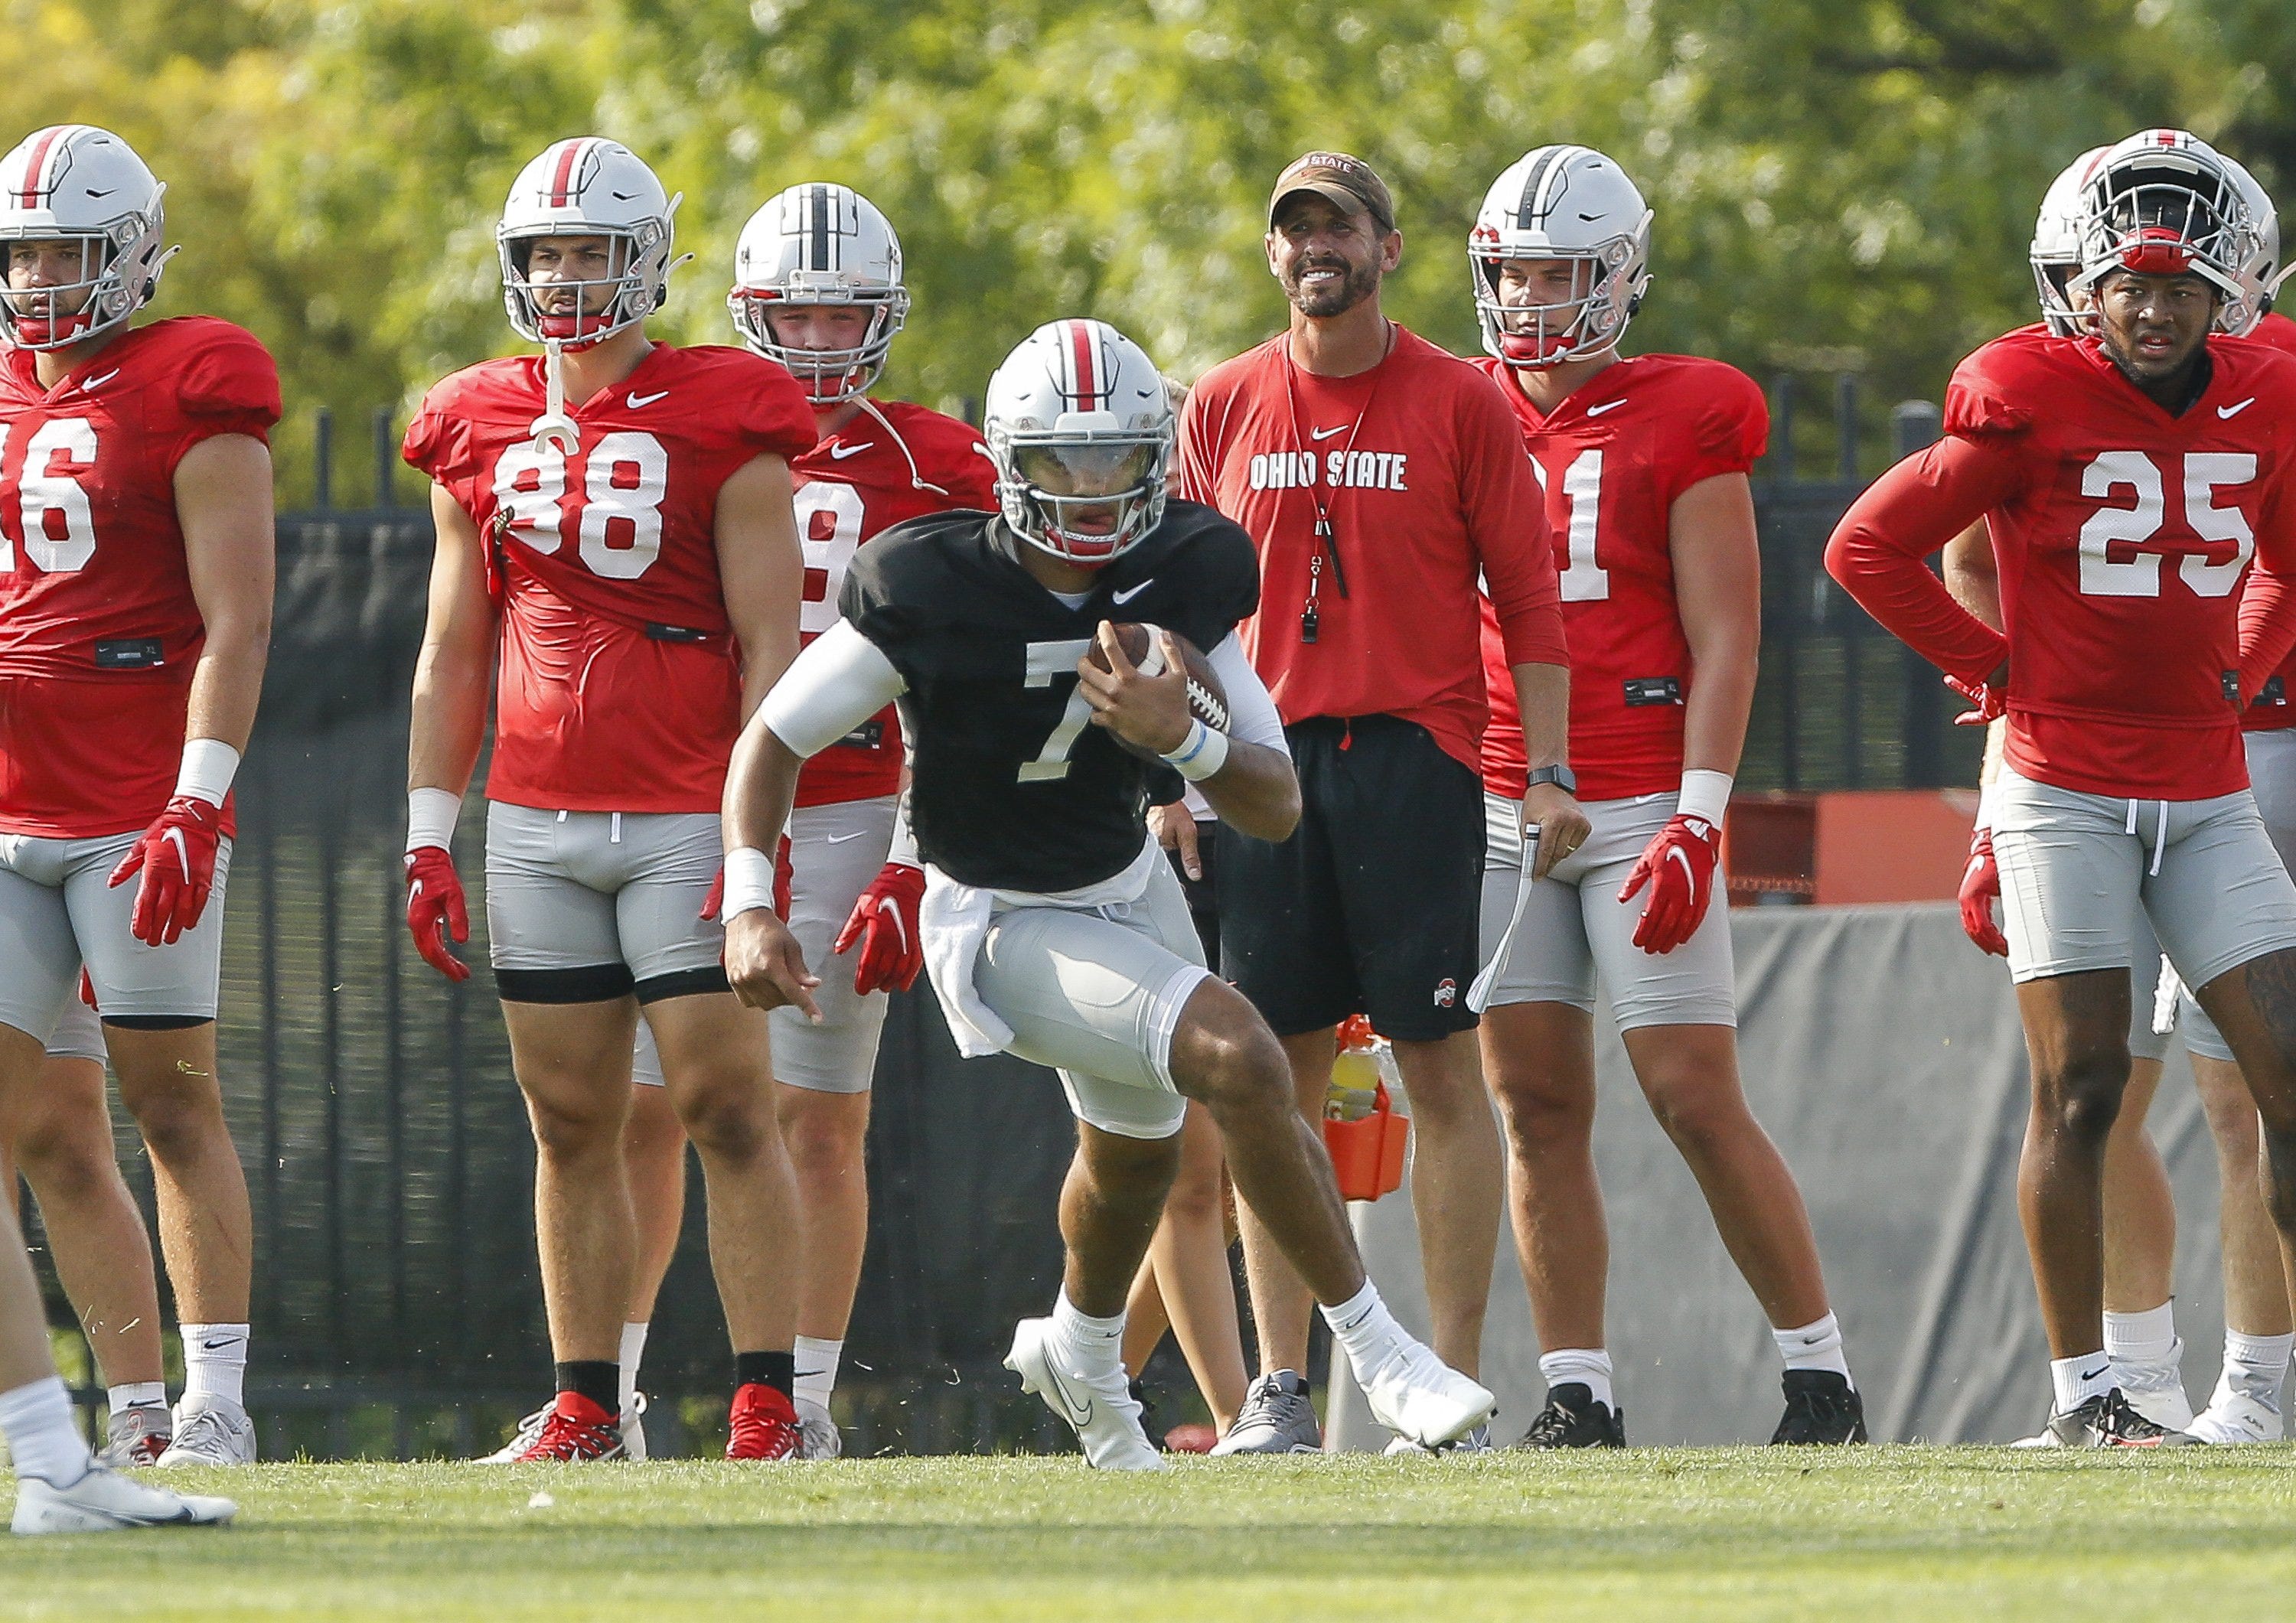 Who will be Ohio State QB? Ryan Day says he'll know soon